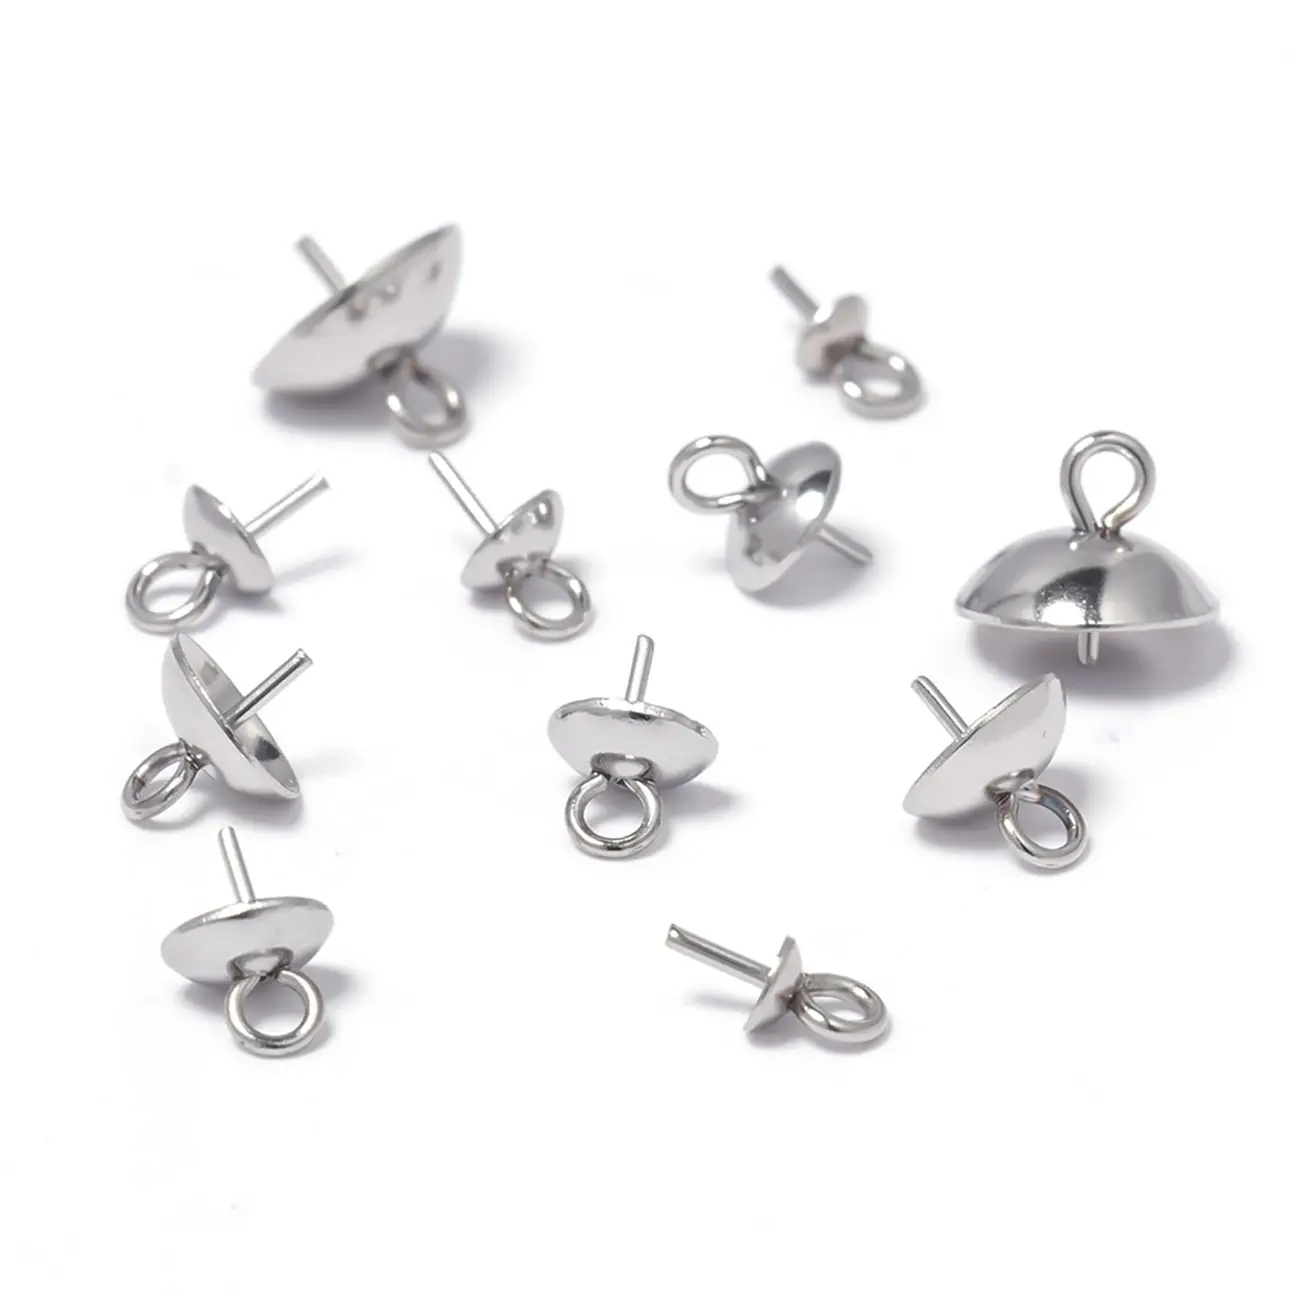 

30pcs Stainless Steel Top Drilled Beads Bead Caps Clasps Hooks End Caps DIY Charms Connectors Jewelry Findings Accessories